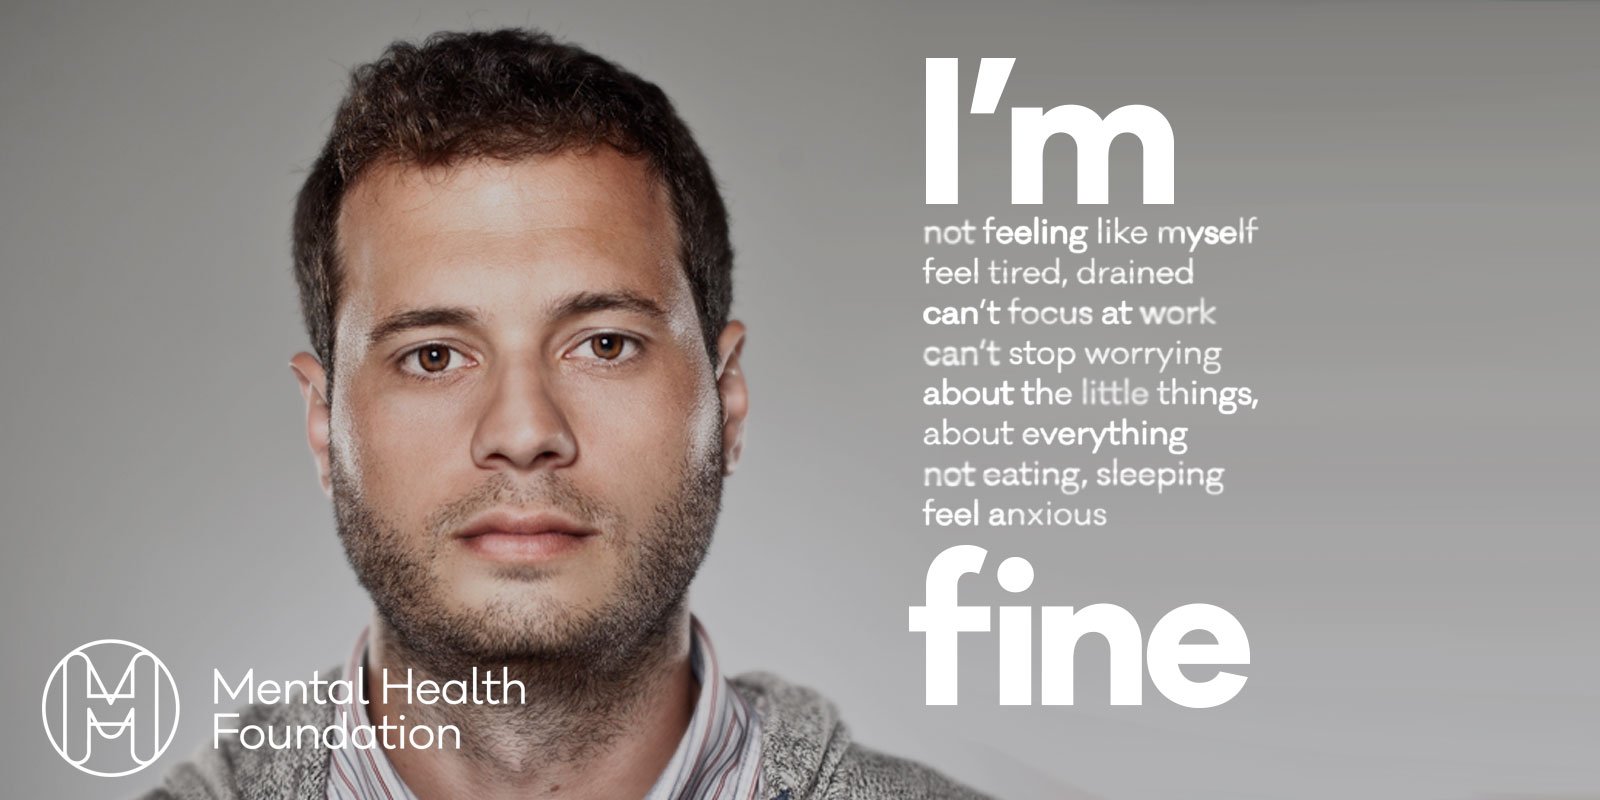 One in four - mental health campaign - I'm fine can mean many things